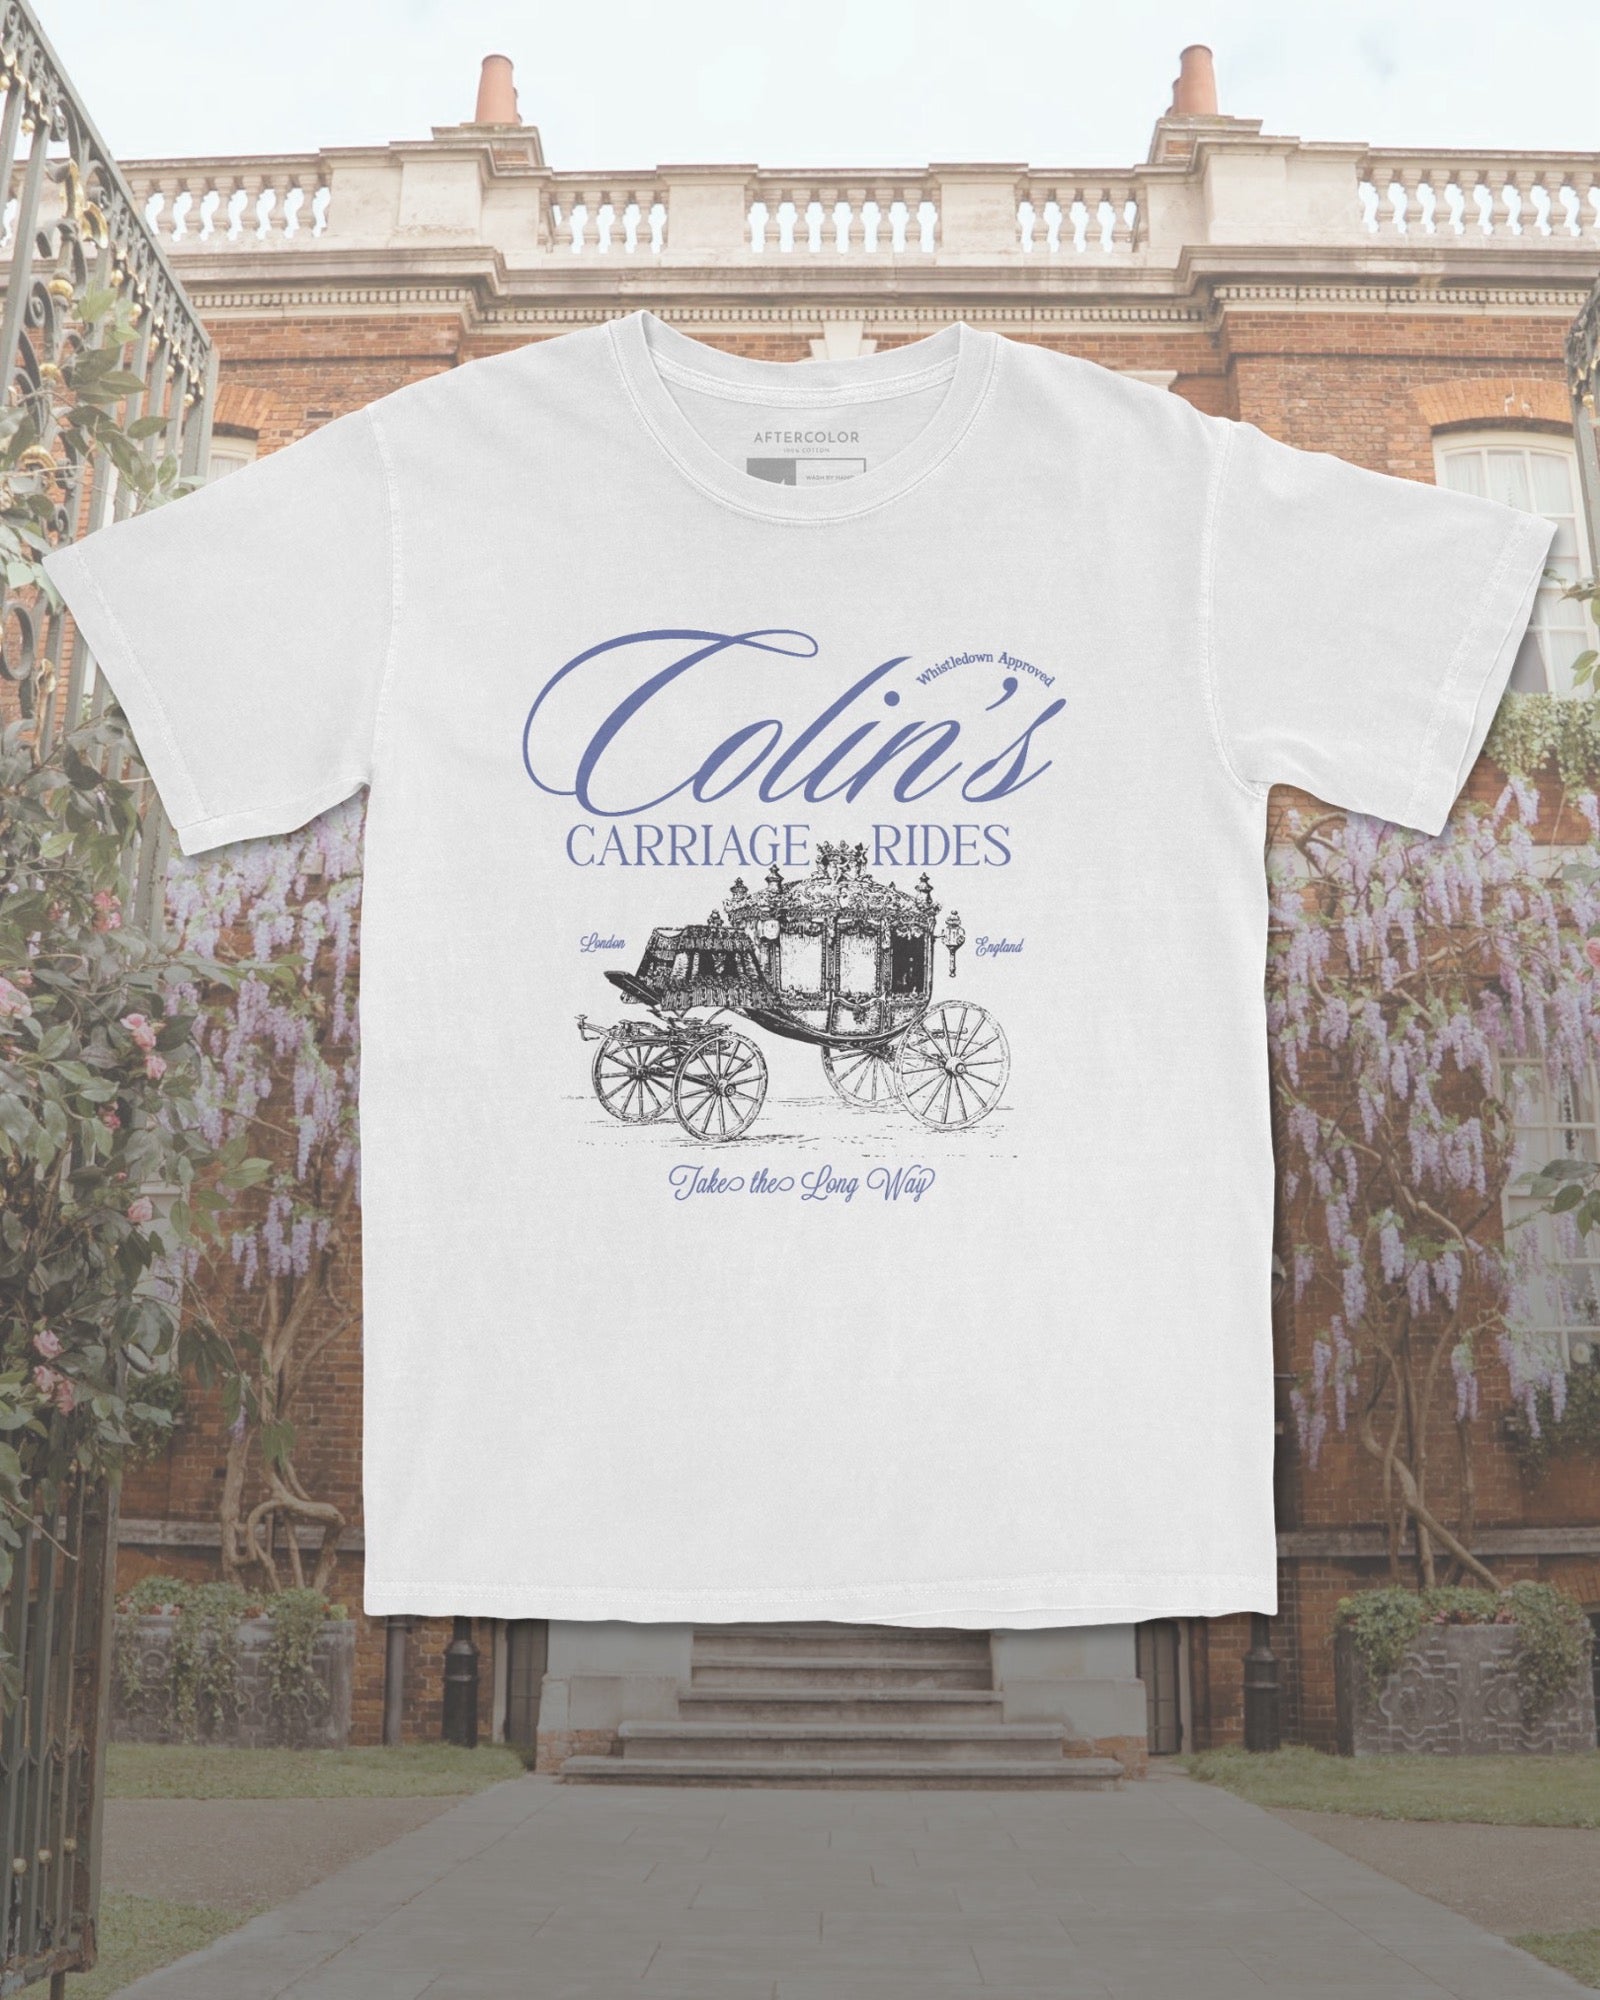 Colins Carriage Rides Garment Dyed Tee